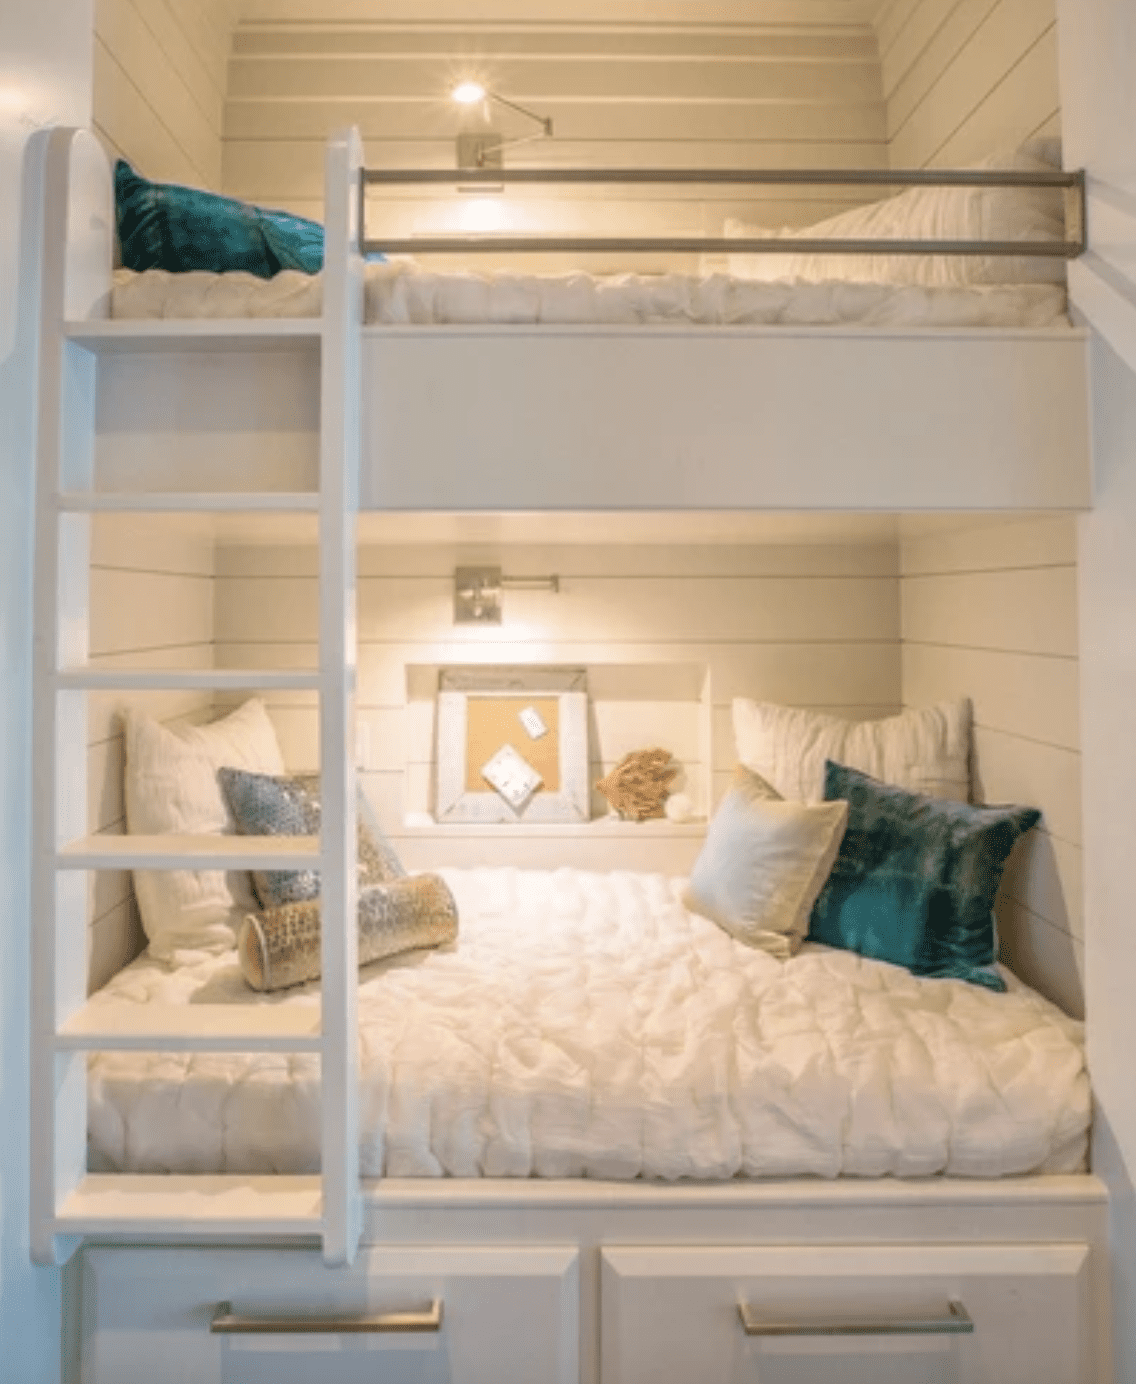 25 fantastic built-in bed ideas for children's rooms - 89